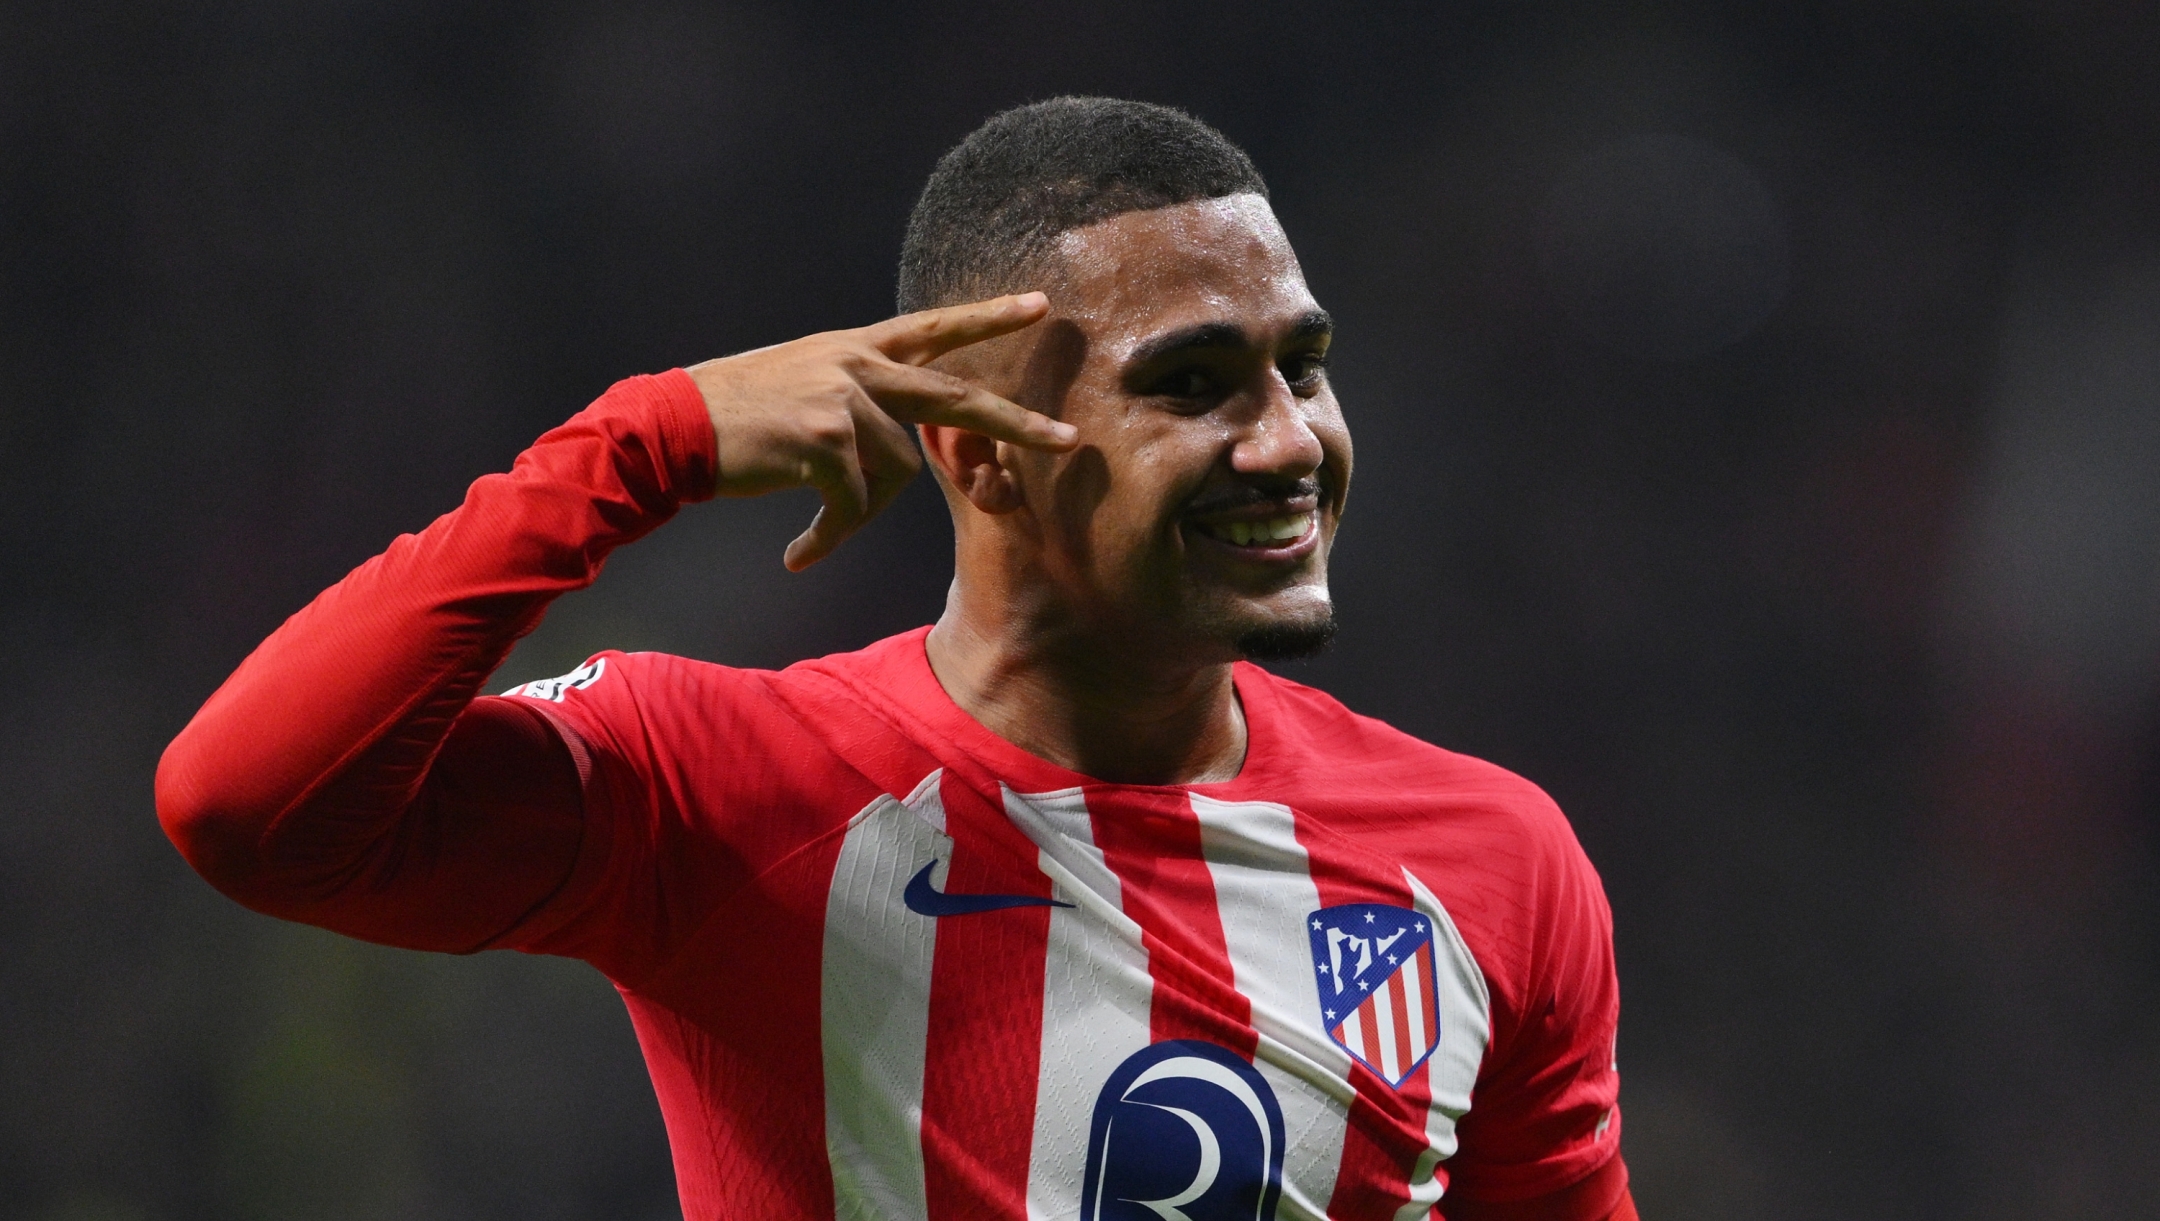 MADRID, SPAIN - JANUARY 18: Samuel Lino of Atletico Madrid celebrates scoring his team's first goal during the Copa del Rey Round of 16 match between Atletico Madrid and Real Madrid CF at Civitas Metropolitano Stadium on January 18, 2024 in Madrid, Spain. (Photo by David Ramos/Getty Images)